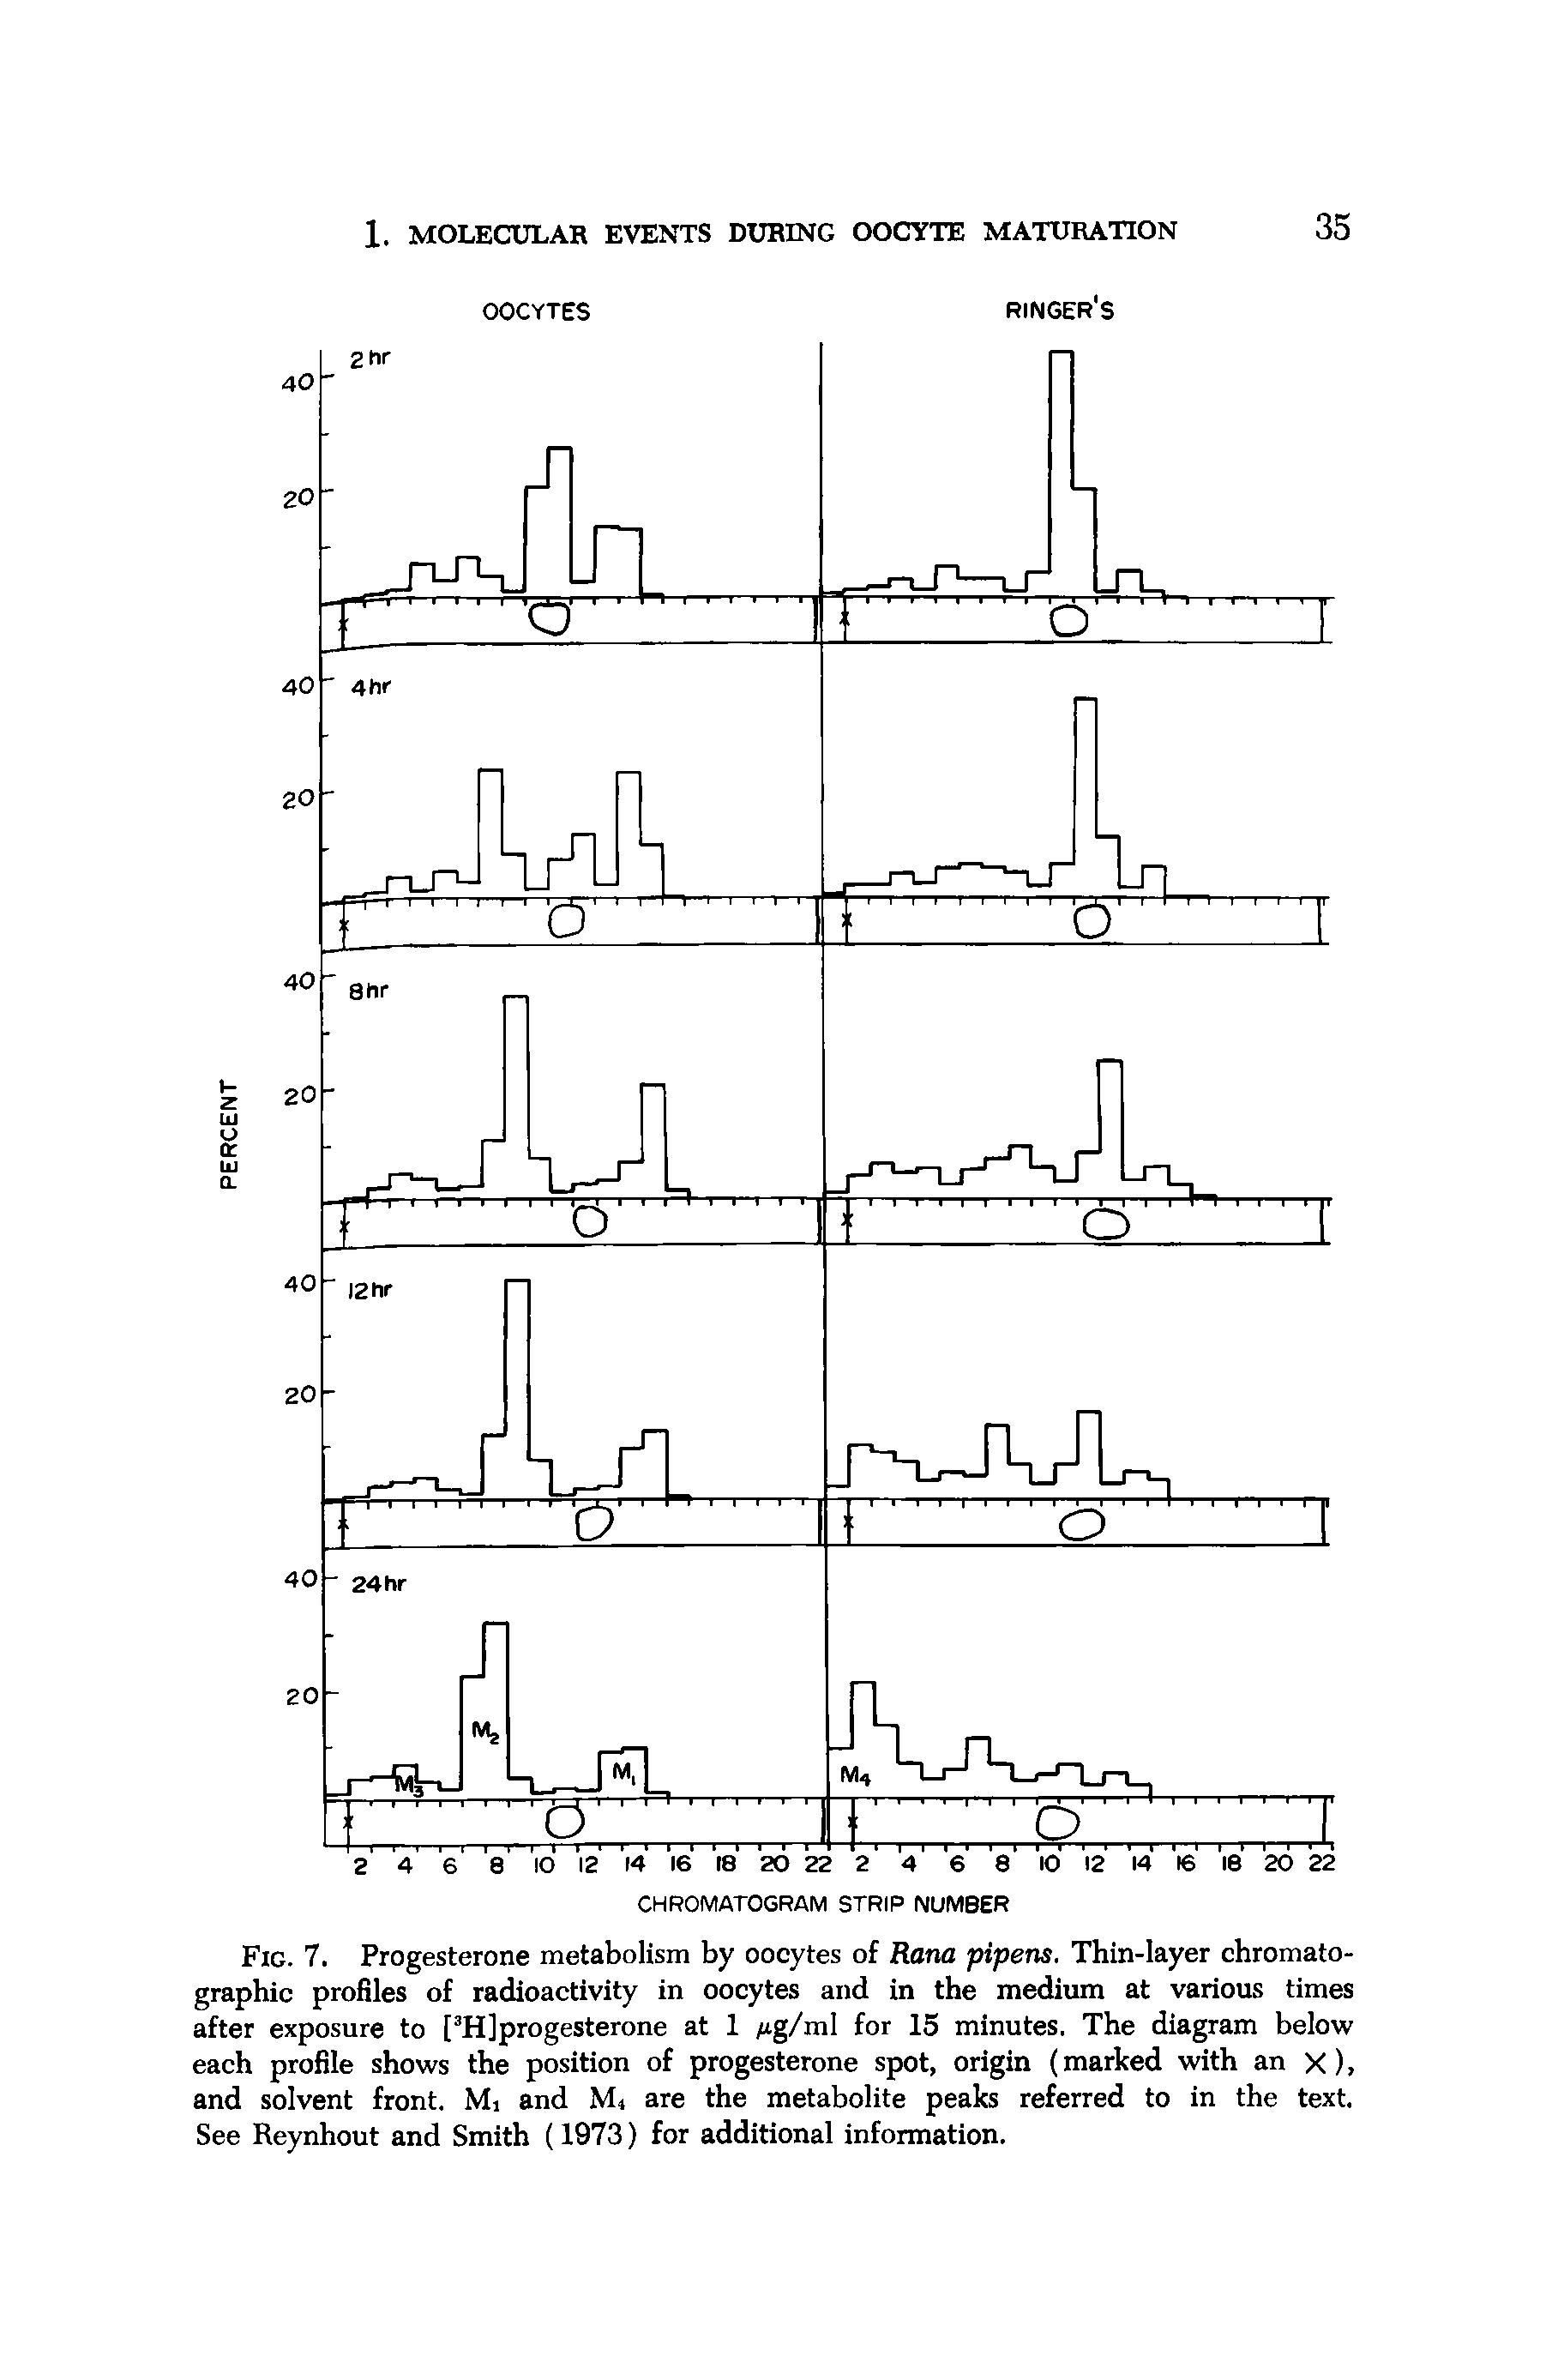 Fig. 7. Progesterone metabolism by oocytes of Rana pipens. Thin-layer chromatographic profiles of radioactivity in oocytes and in the medium at various times after exposure to [ H]progesterone at 1 Ag/ml for 15 minutes. The diagram below each profile shows the position of progesterone spot, origin (marked with an X), and solvent front. Mi and M are the metabolite peaks referred to in the text. See Reynhout and Smith (1973) for additional information.